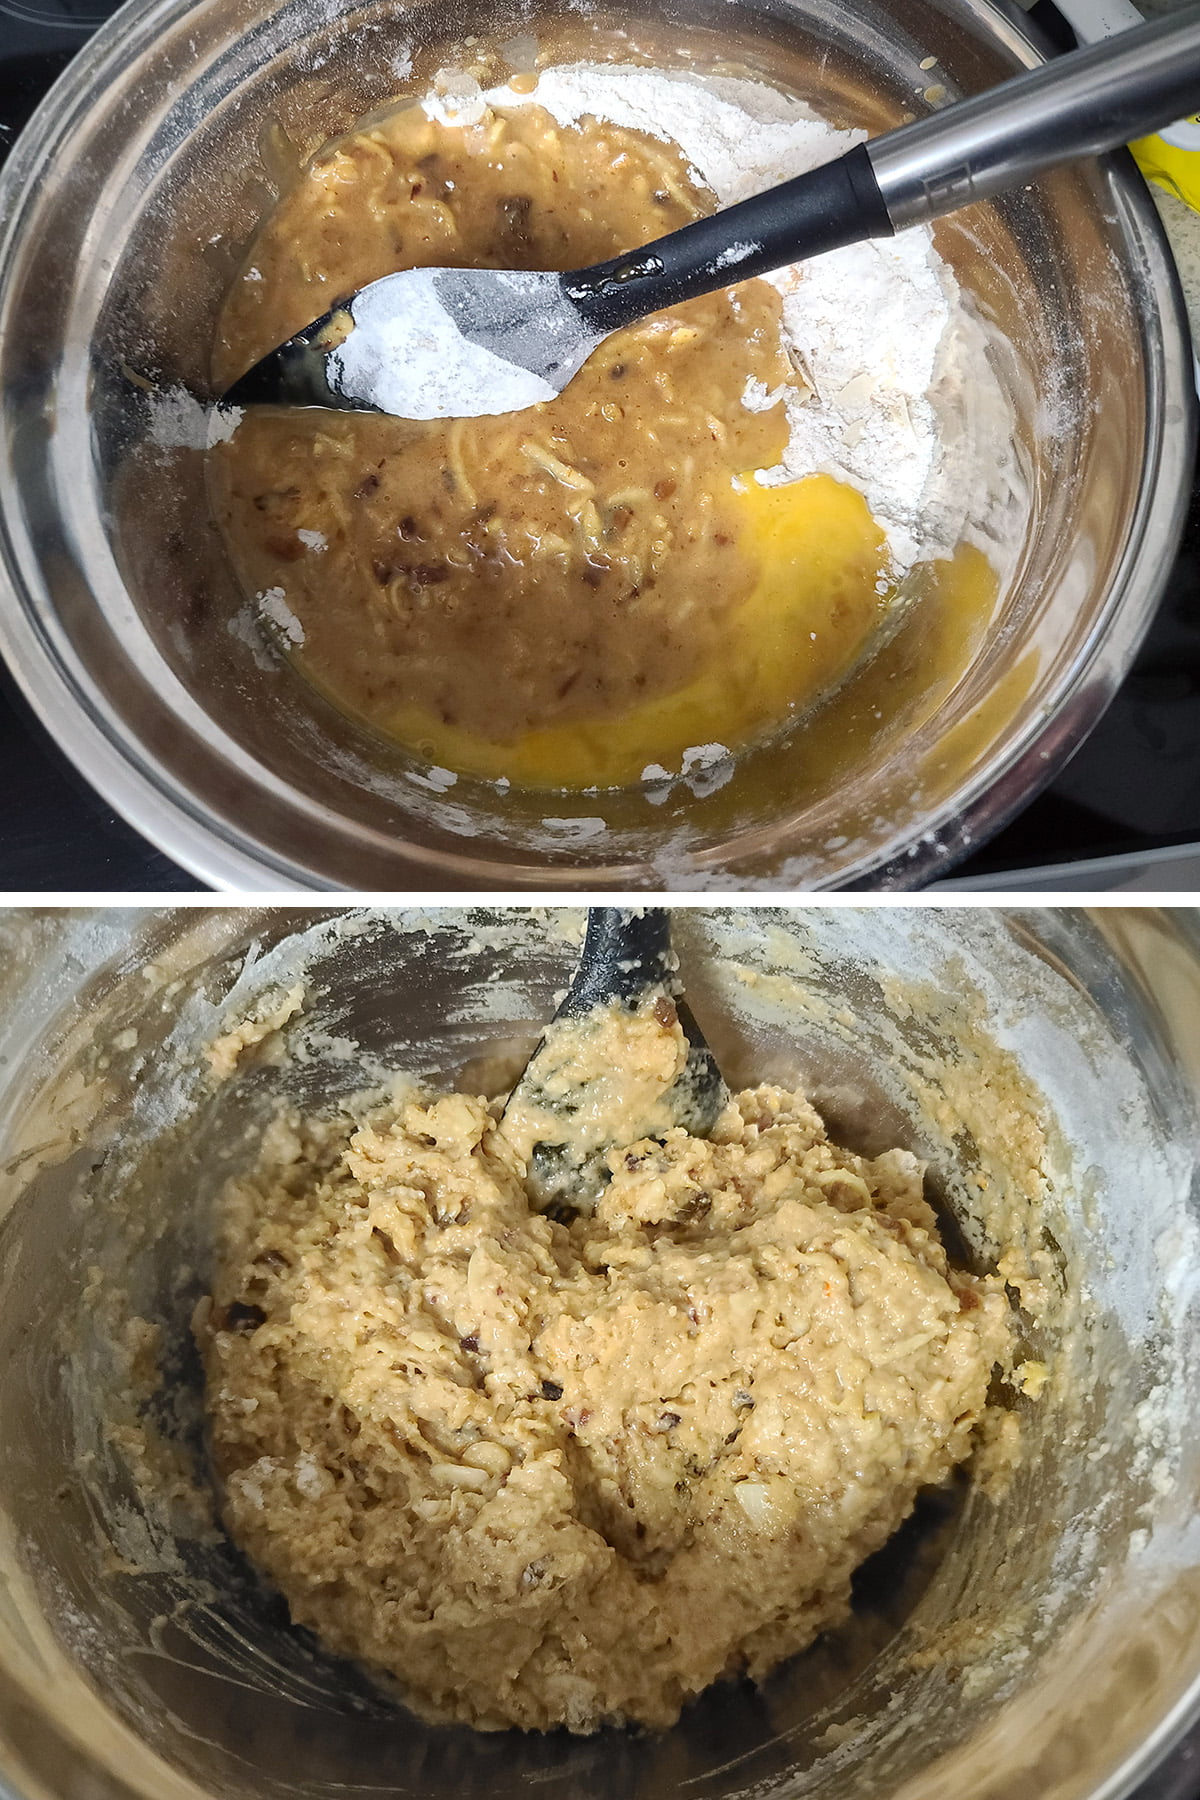 A two part compilation image showing the wet ingredients being added to the dry ingredients, and the finished muffin batter.